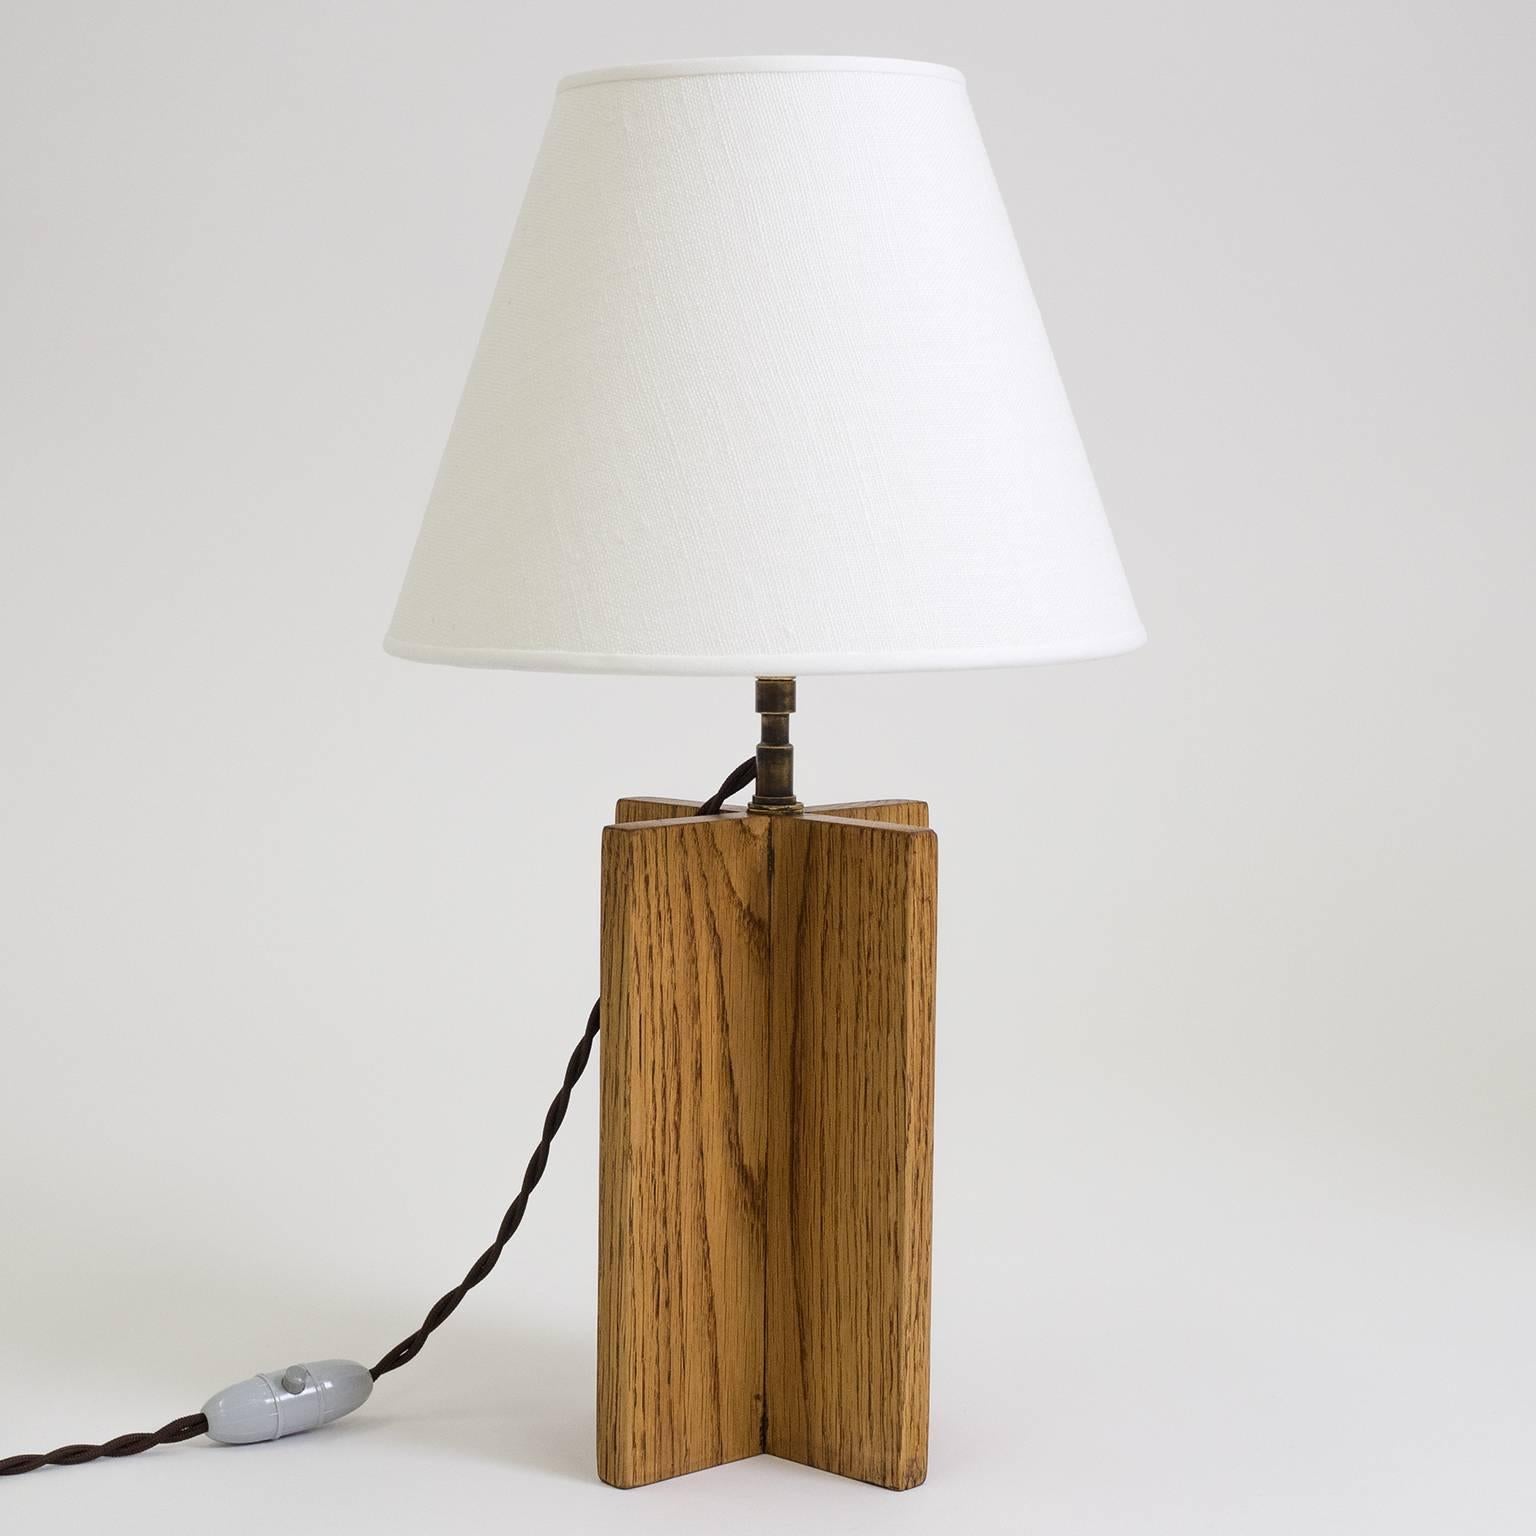 Nice pair of vintage oak 'croisillon' table lamps after Jean-Michel Frank. Solid oak cross-shaped base with a short brass neck and new linen shades. There is one brass and ceramic E14 socket with new wiring.
Measures: Oak base is 7.9inches/20cm